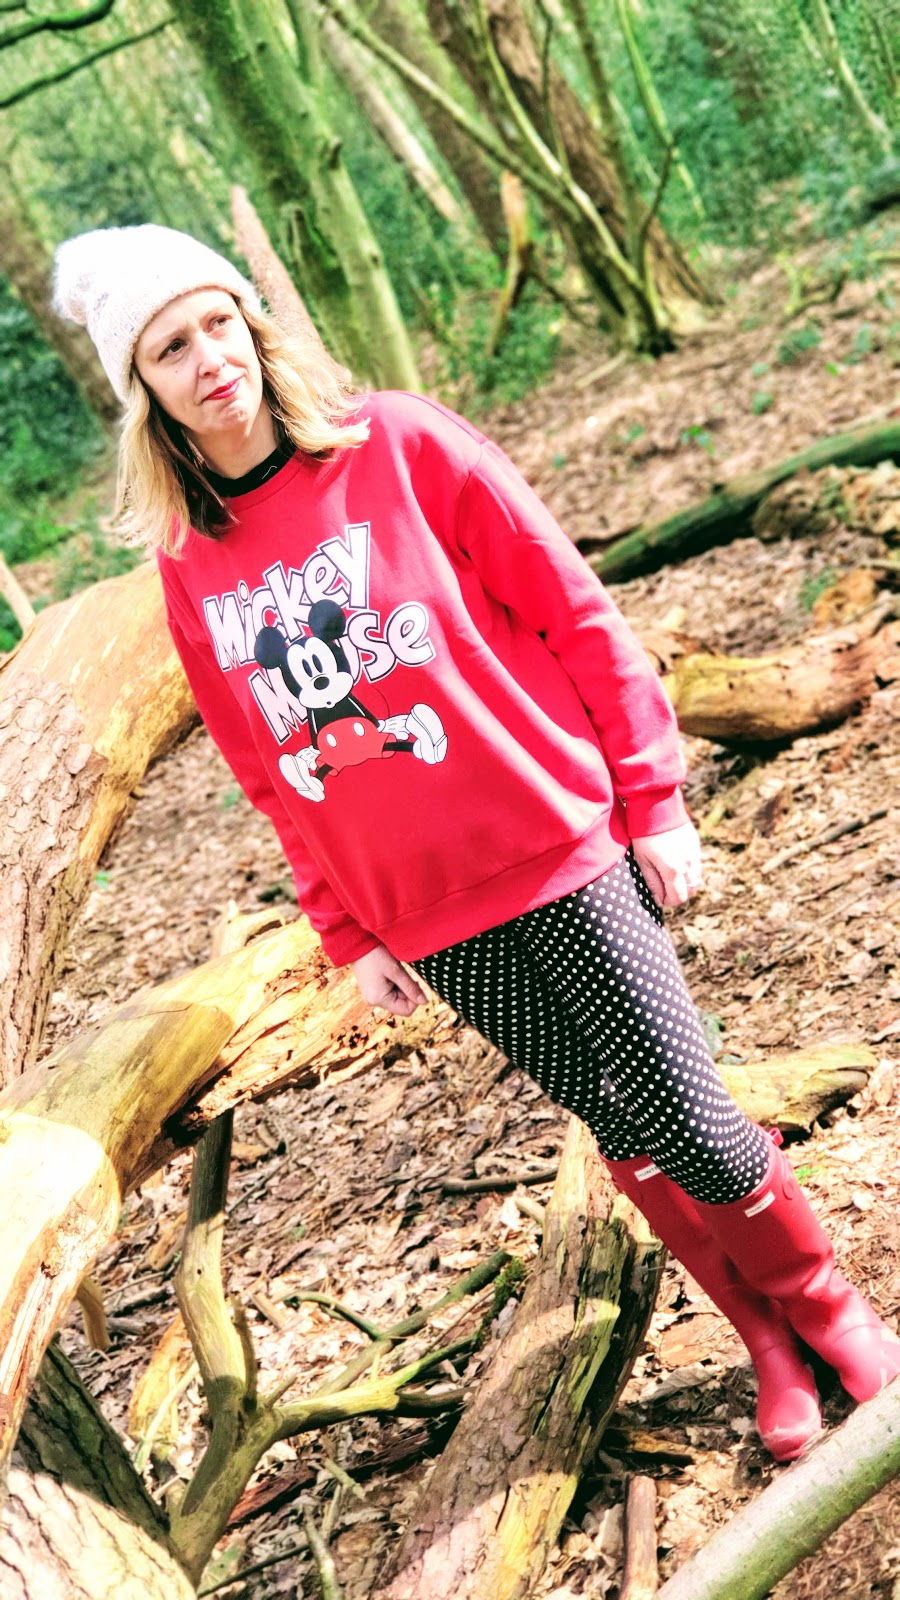 Put Your Mickey Mouse Jumper On And A Feel Good Friday Link Up